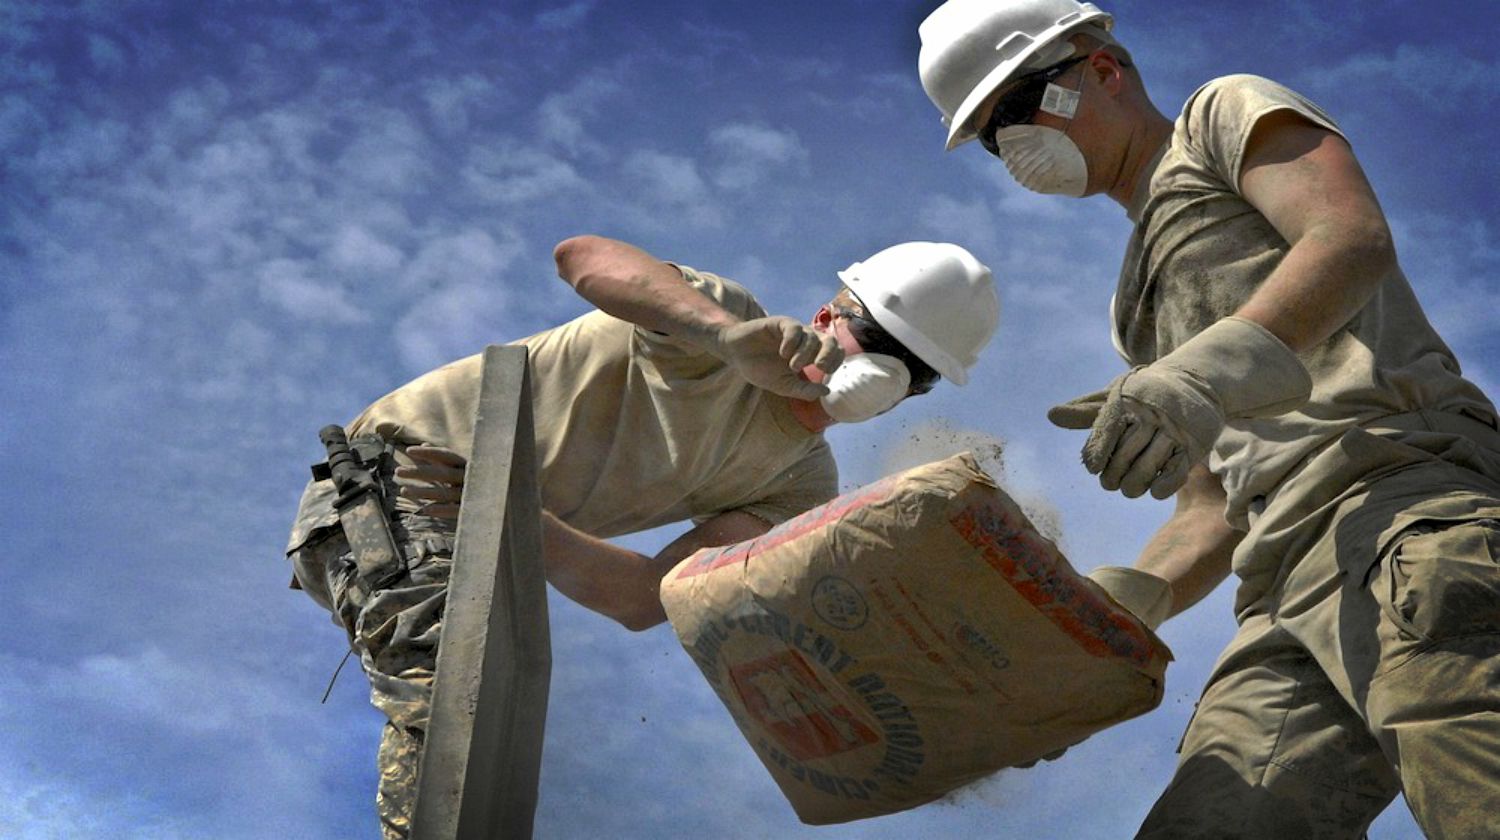 Feature | Two man working | For Preppers, Papercrete Is The New Concrete